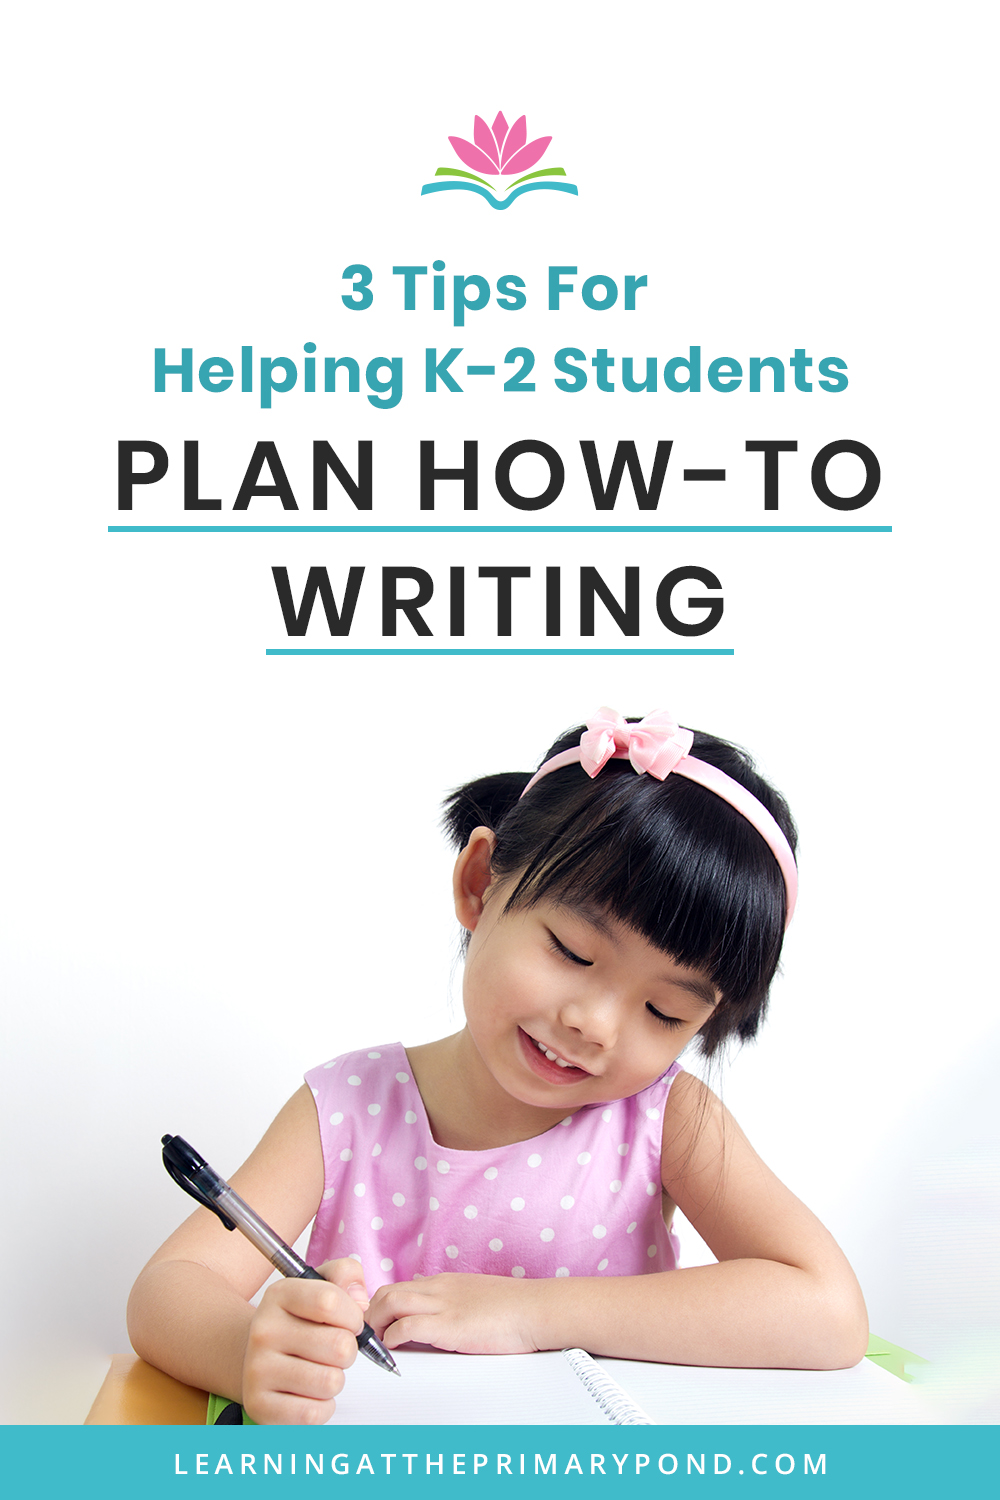 3 Tips For Helping K-2 Students Plan How-To Writing